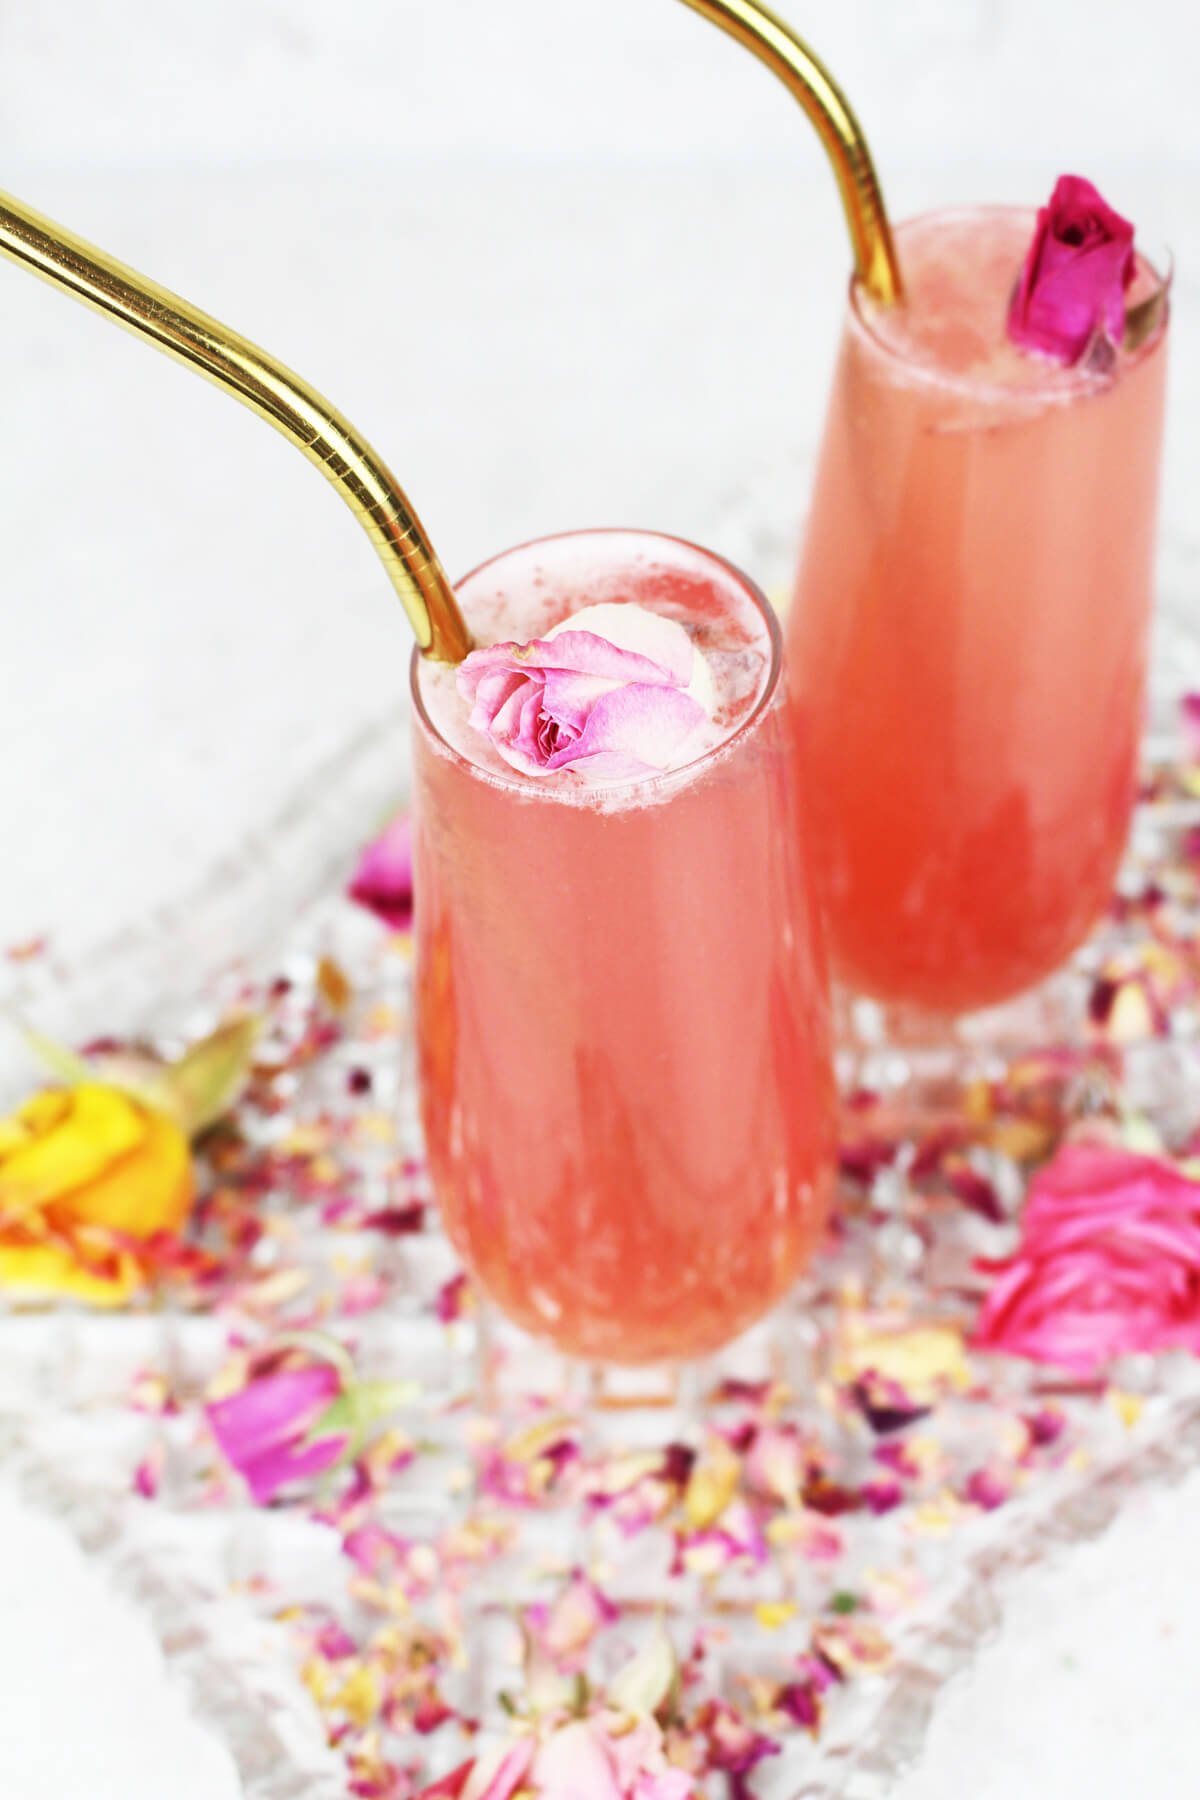 birdseye view of rose lemonade garnished with a pink rose and a gold straw on a glass tray of rose petals.